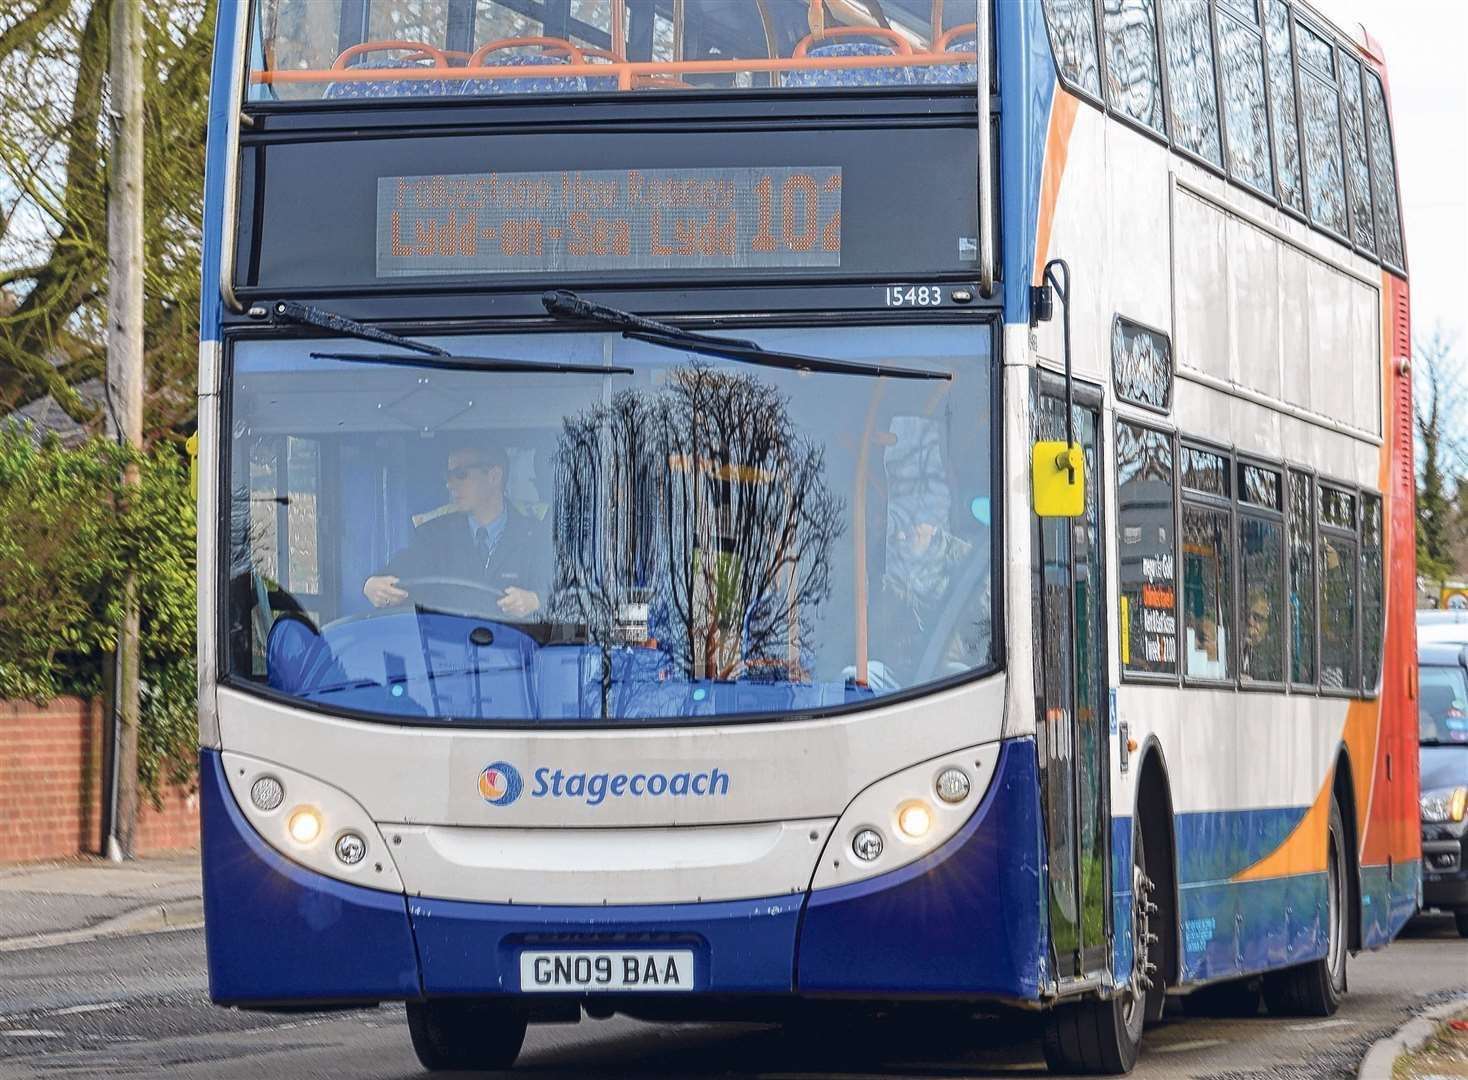 Stagecoach are continuing to run the vast majority of their services across Kent